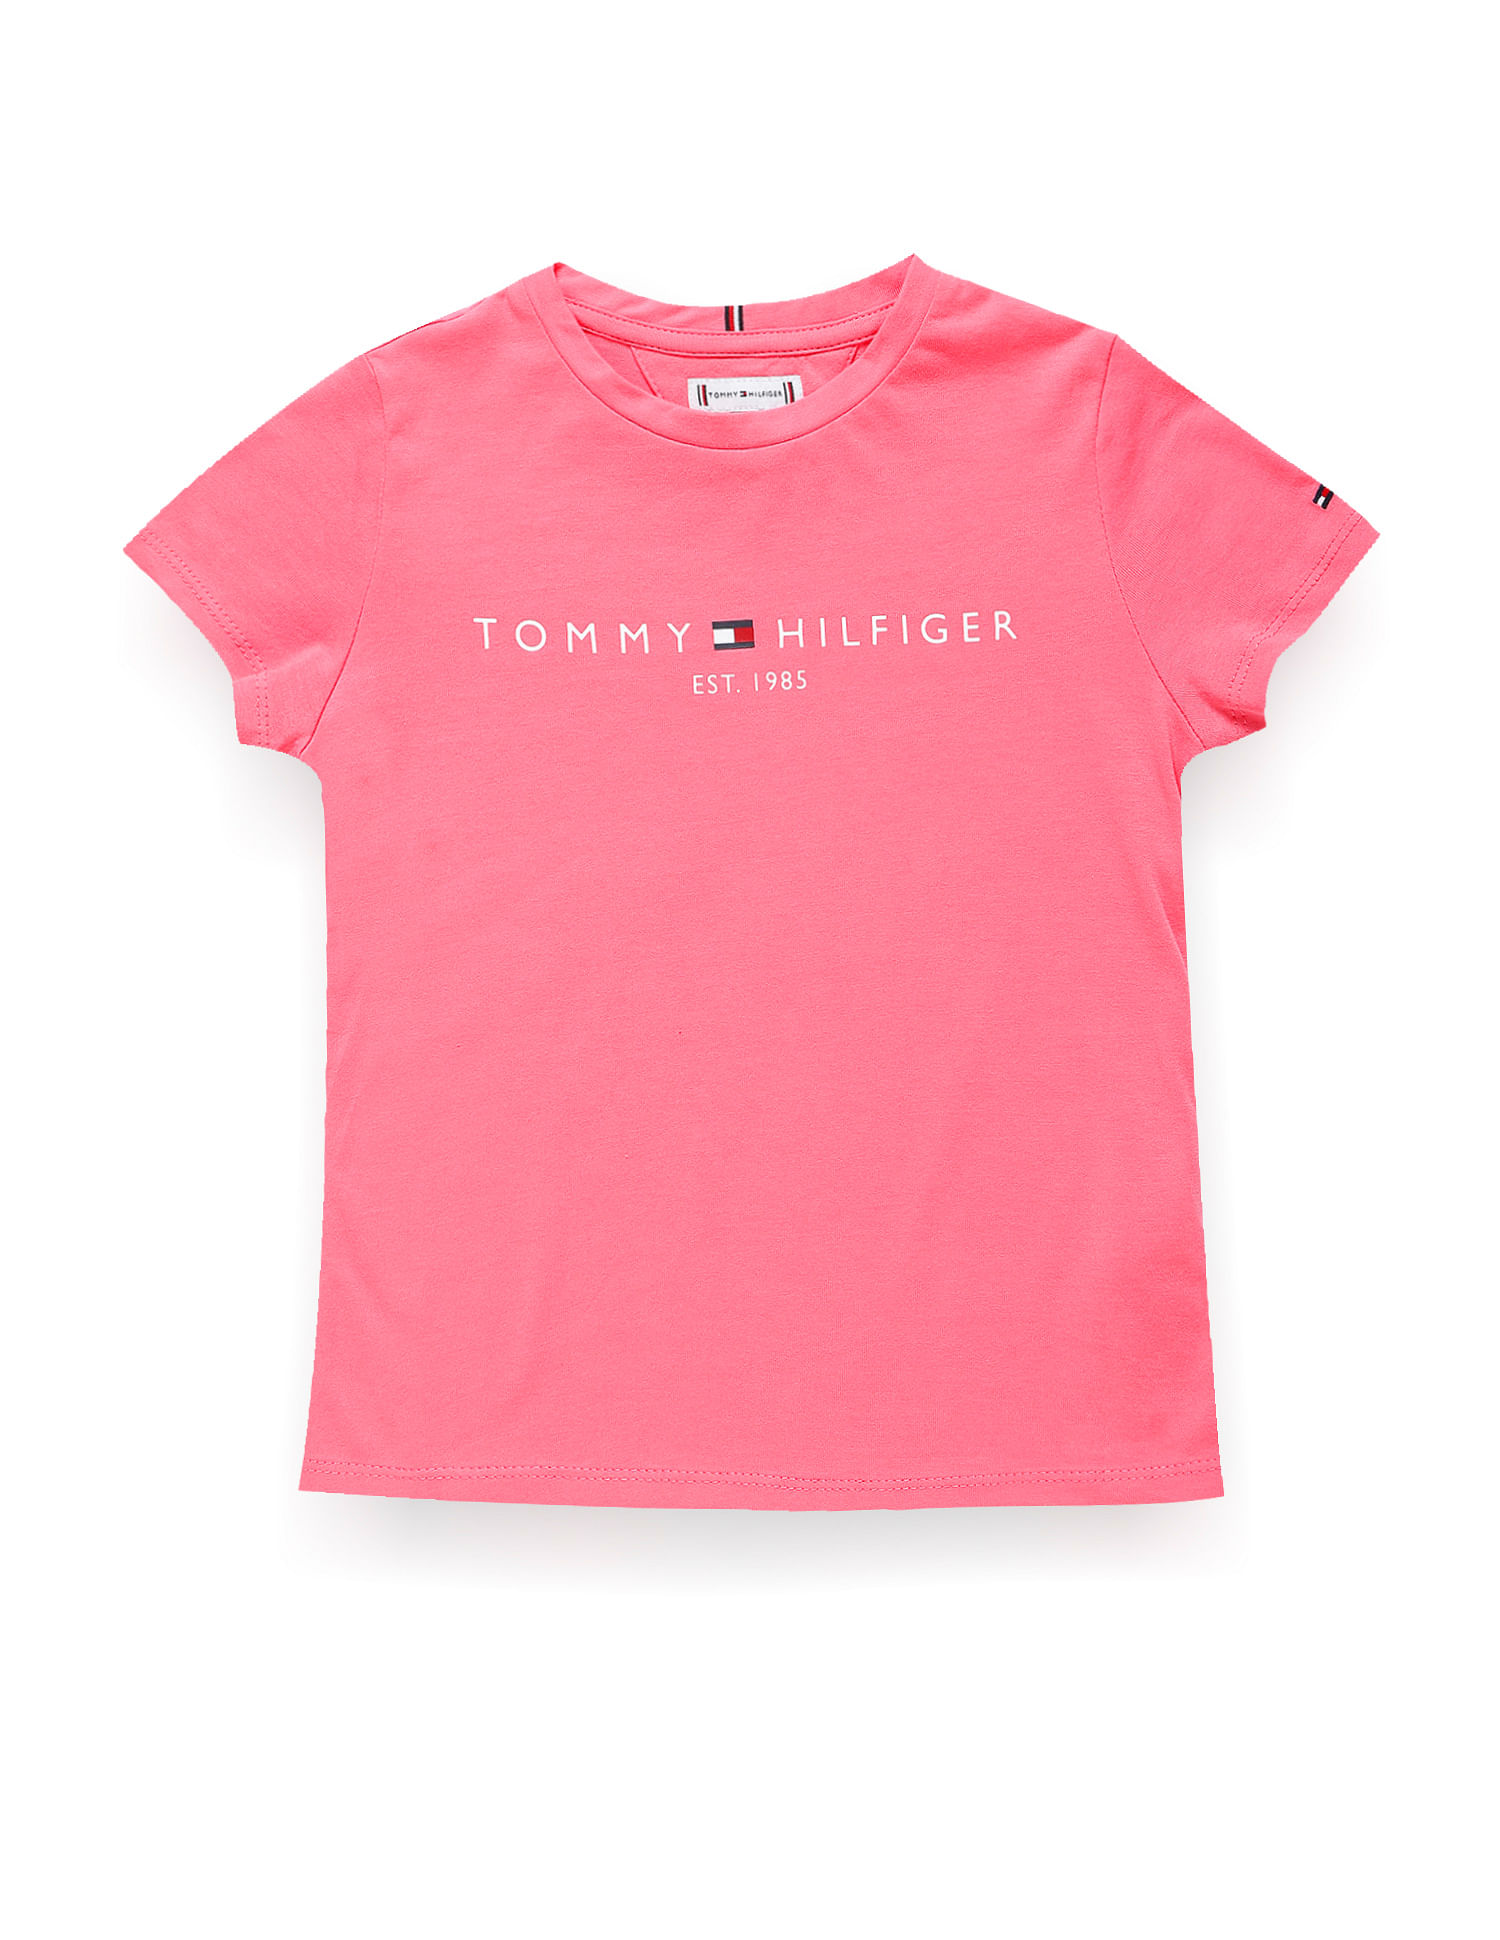 Buy Tommy Hilfiger Kids Girls Sustainable T-shirt Essential